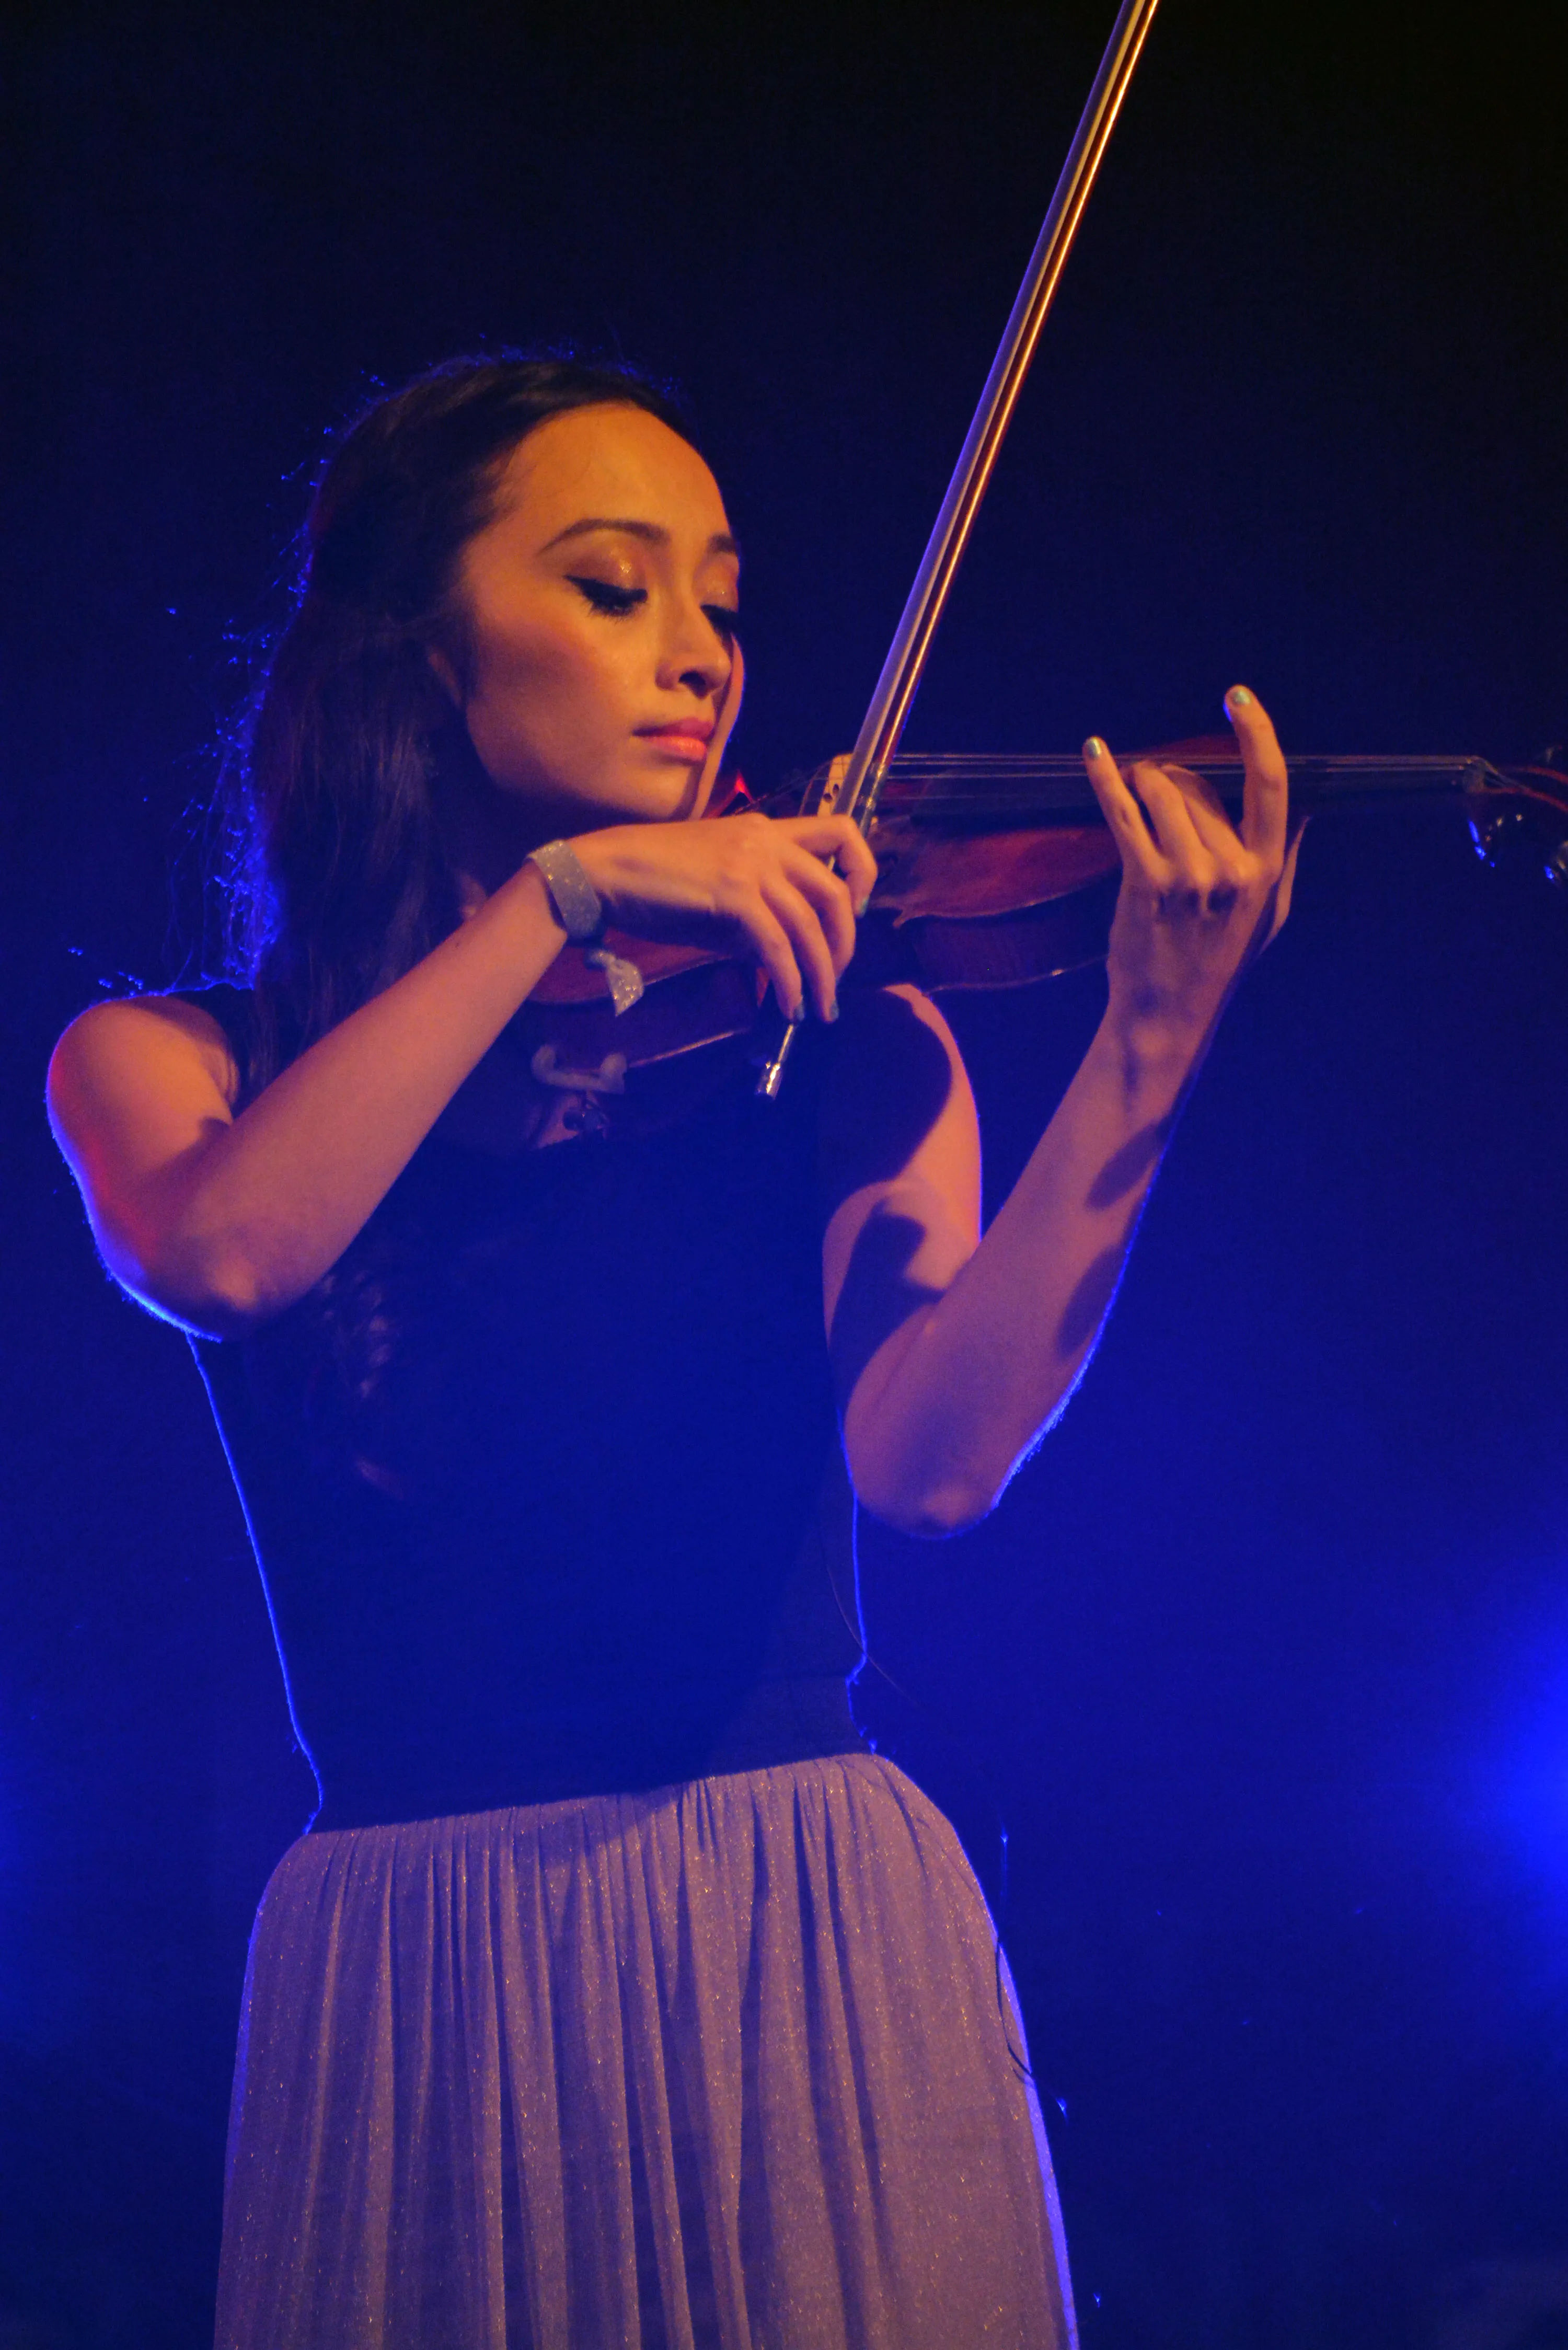 A young woman playing the violin on stage.